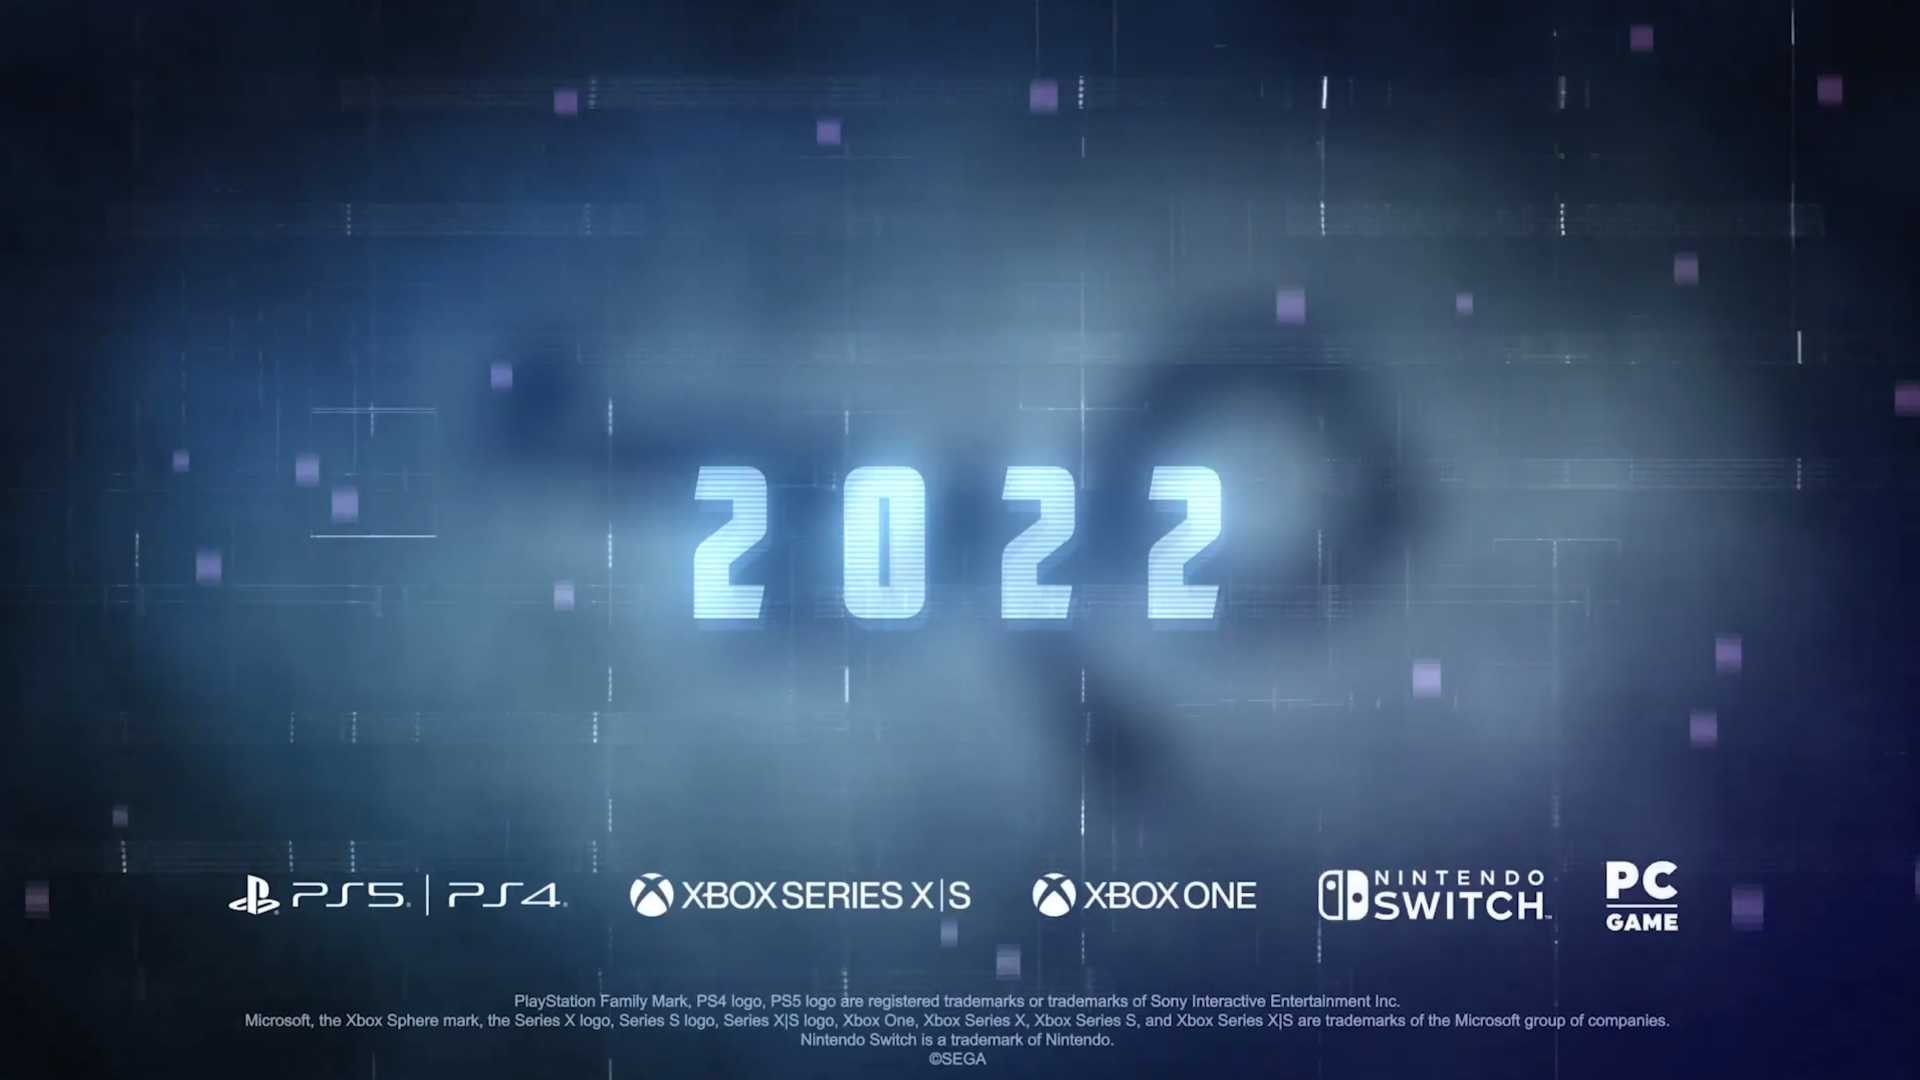 There appears to be a new Sonic the Hedgehog game coming in 2022